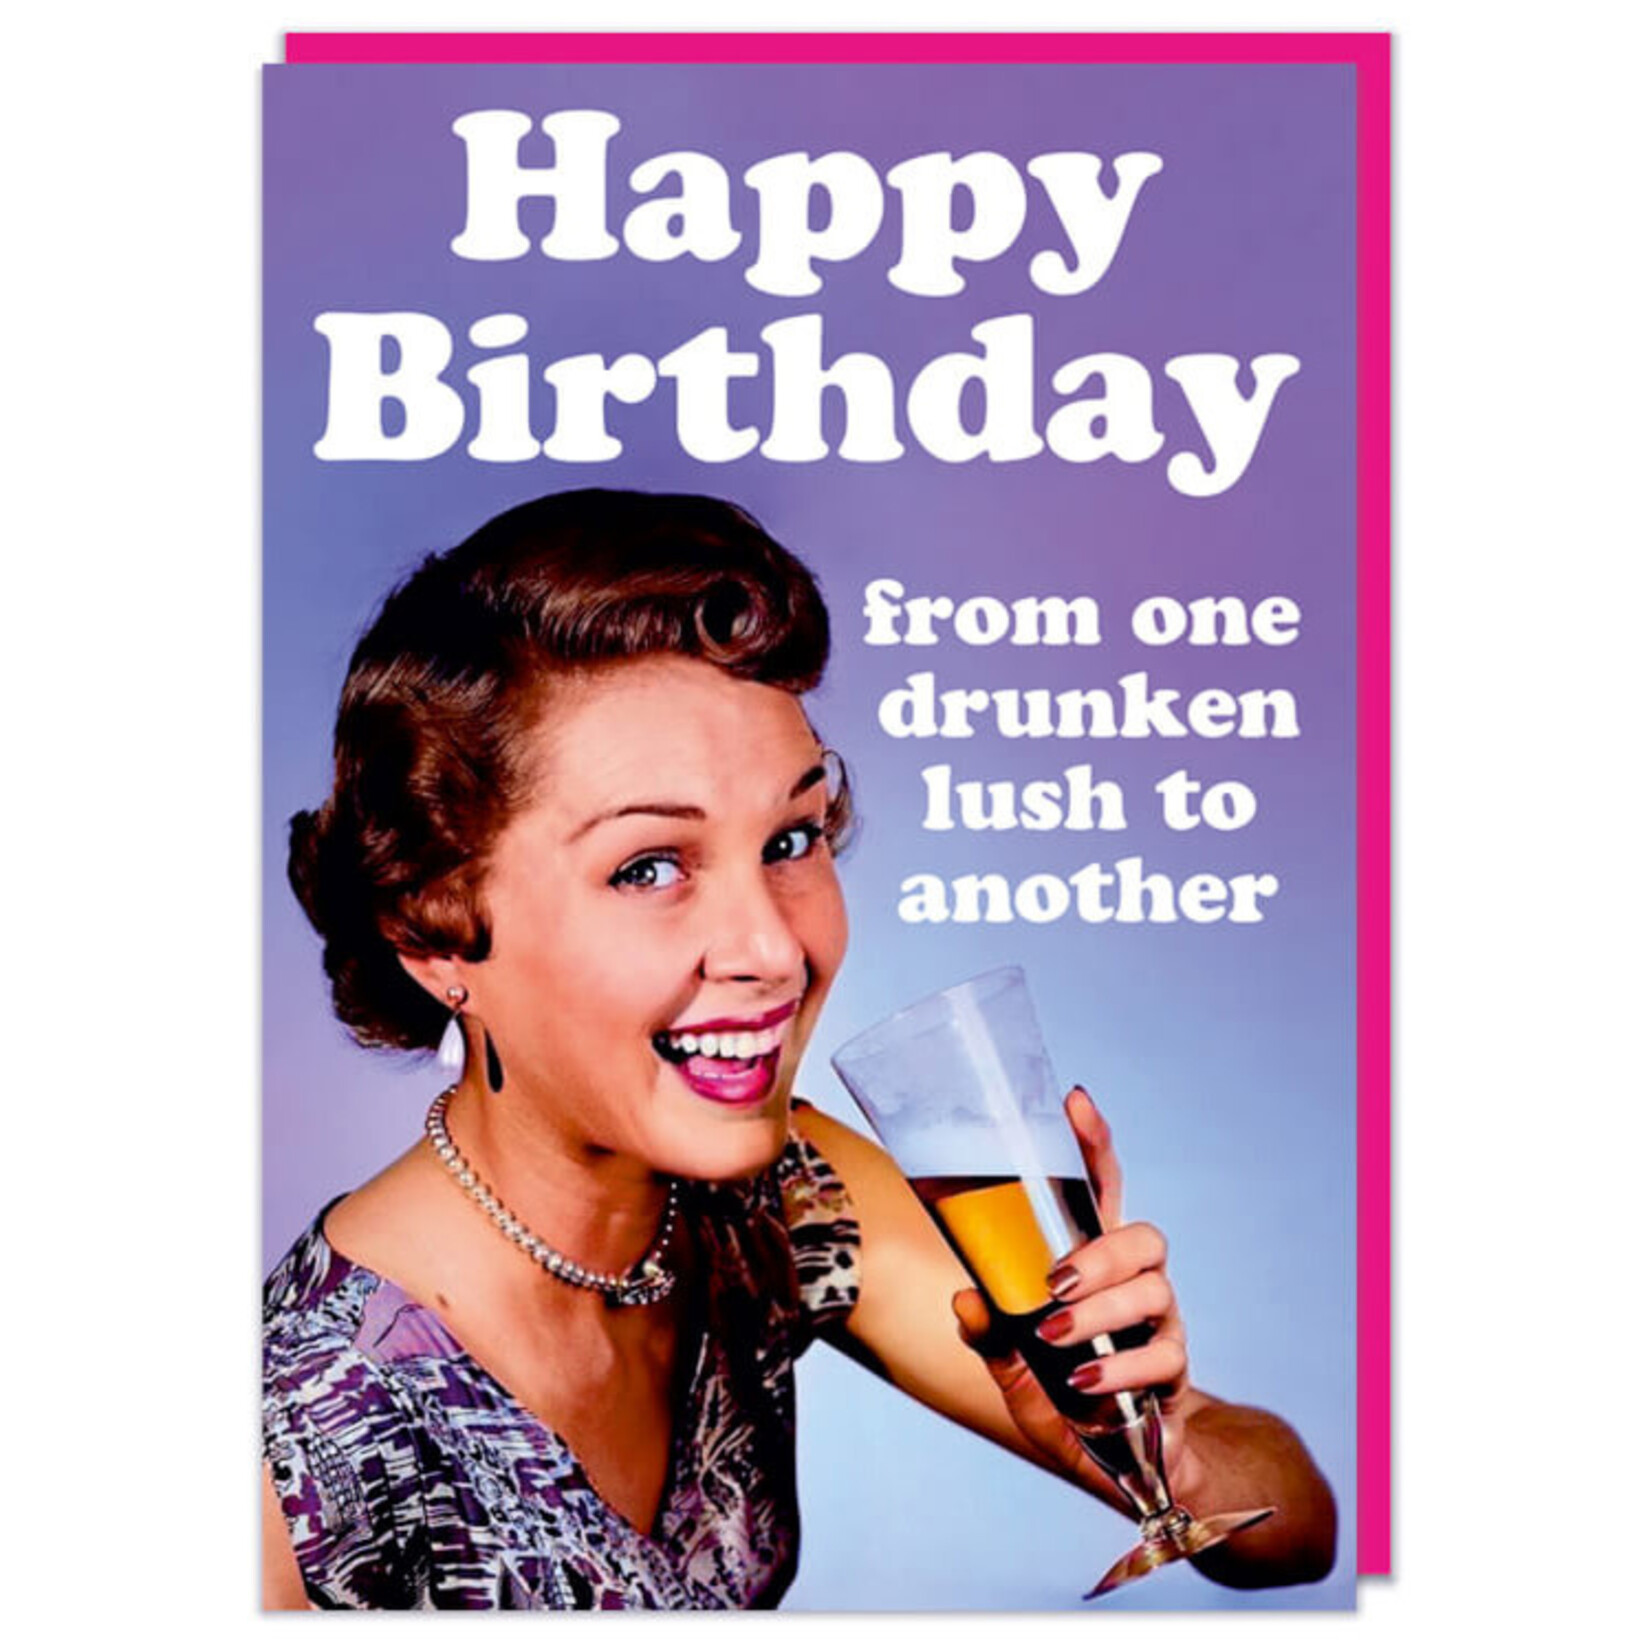 Dean Morris Happy Birthday from one drunken lush to another Card